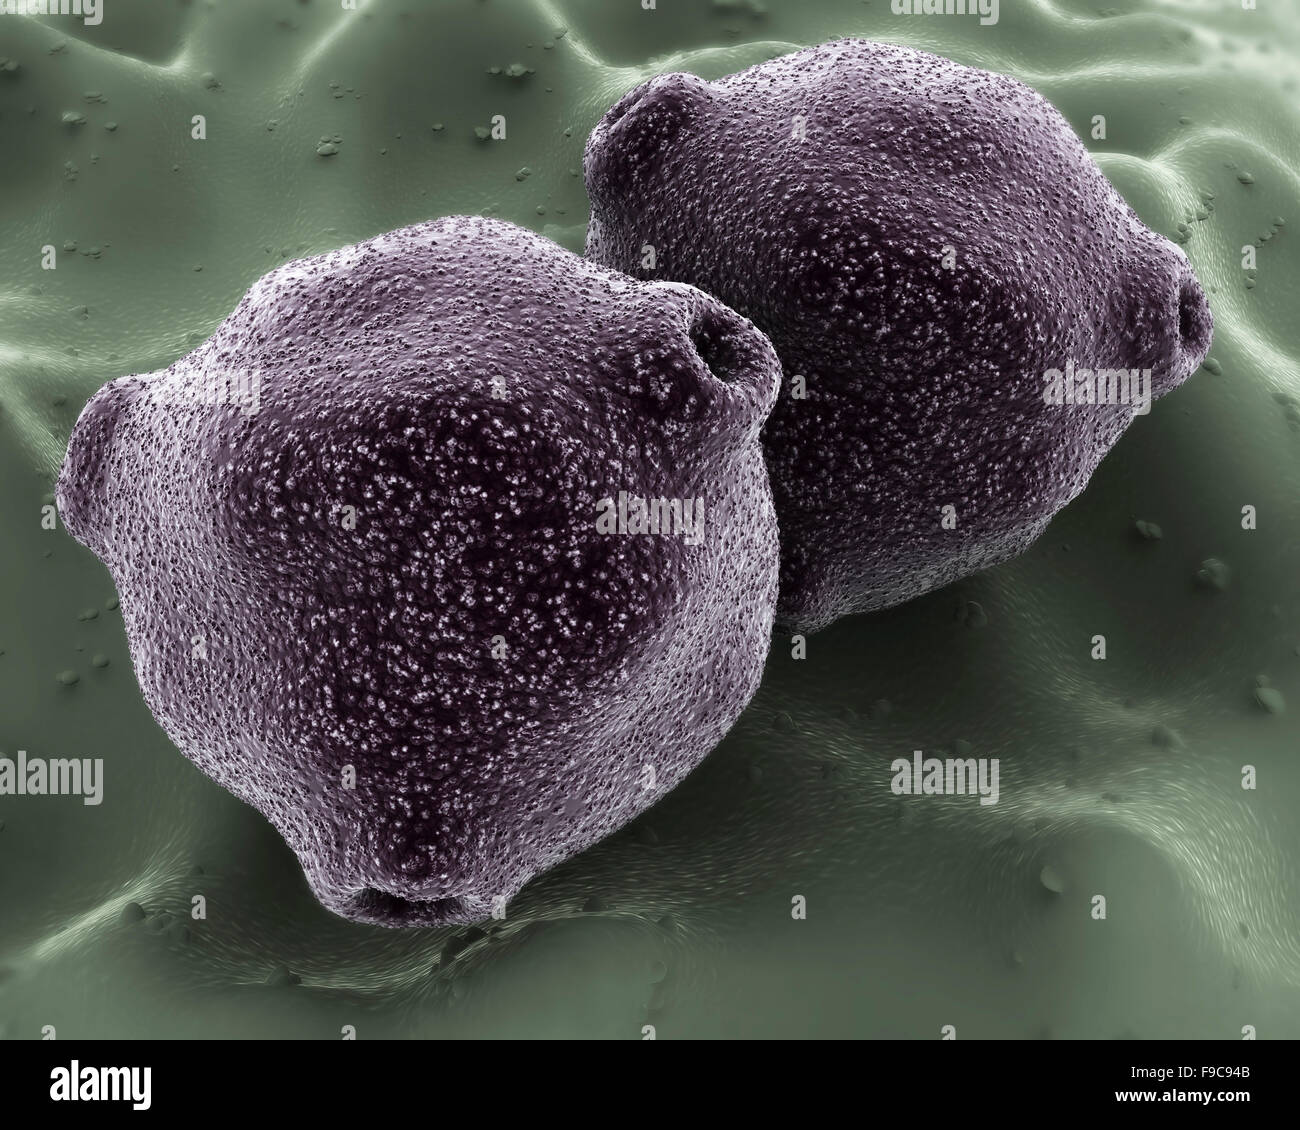 Microscopic view of birch tree pollen. Birch tree pollen is considered to be an important allergenic tree pollen. Stock Photo